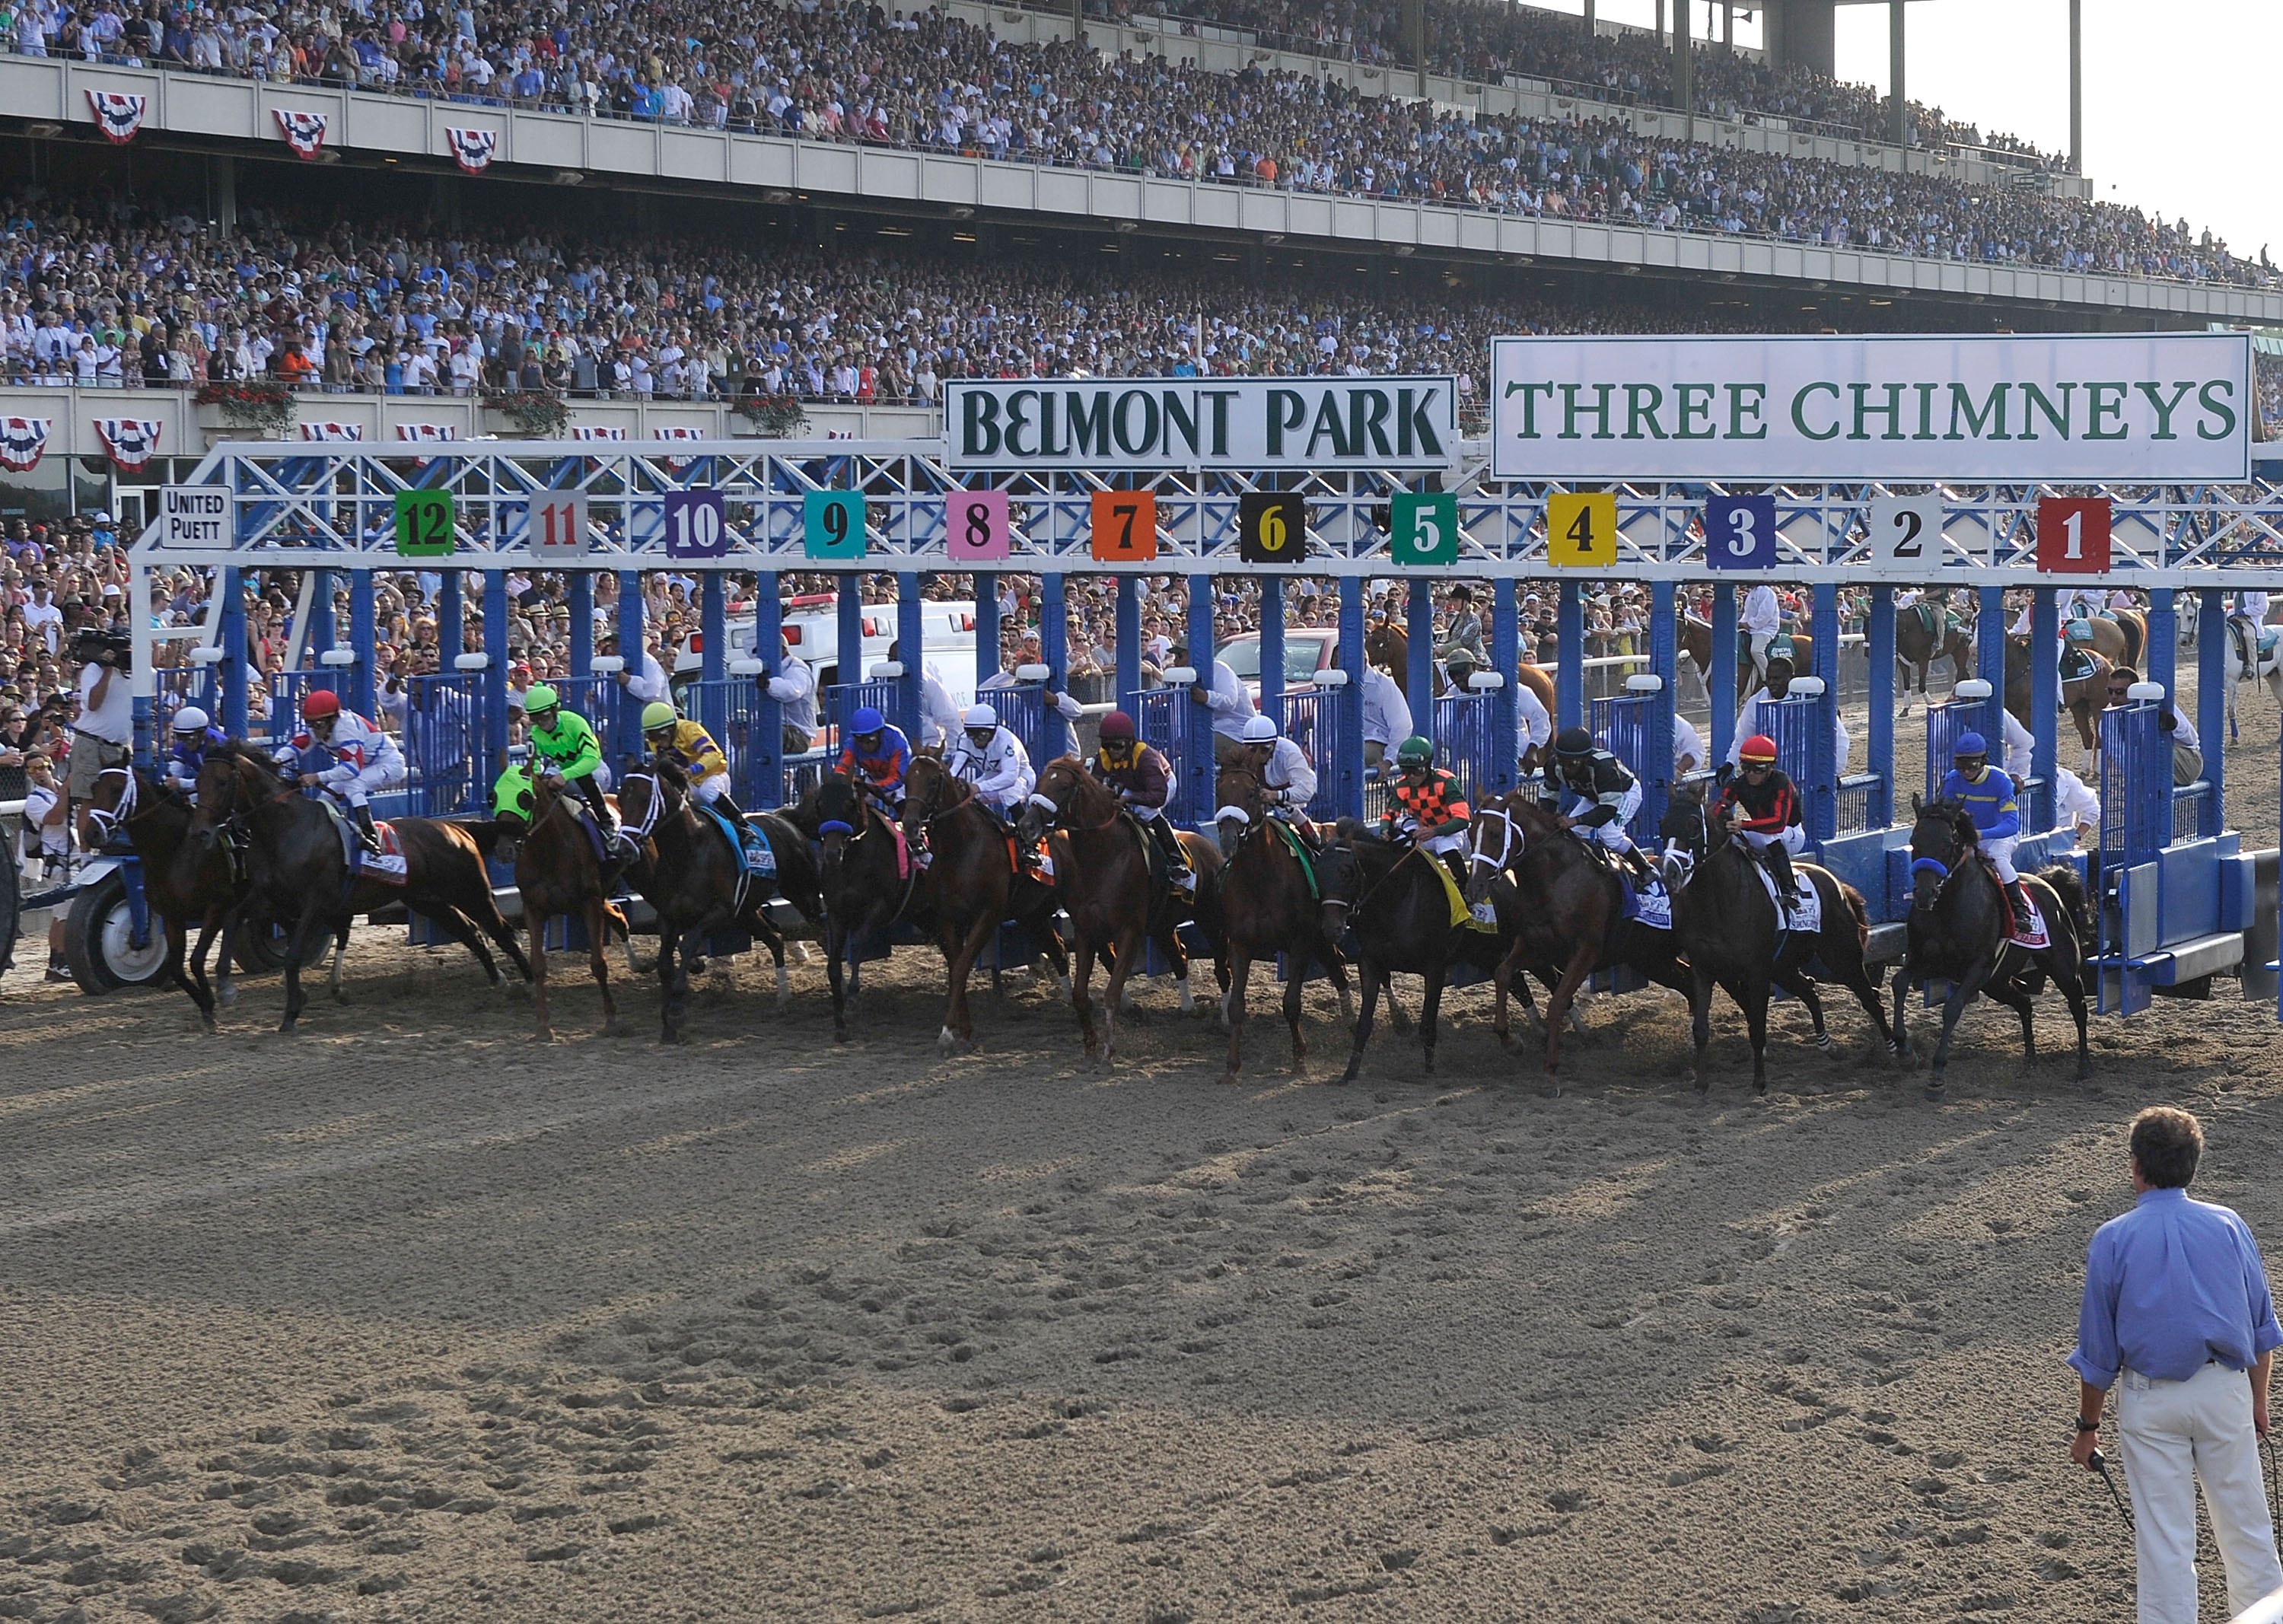 ELMONT, NY - JUNE 05:  The horses break out of the starting gate at the running of the 142nd Belmont Stakes at Belmont Park on June 5, 2010 in Elmont, New York.  (Photo by Paul Bereswill/Getty Images)